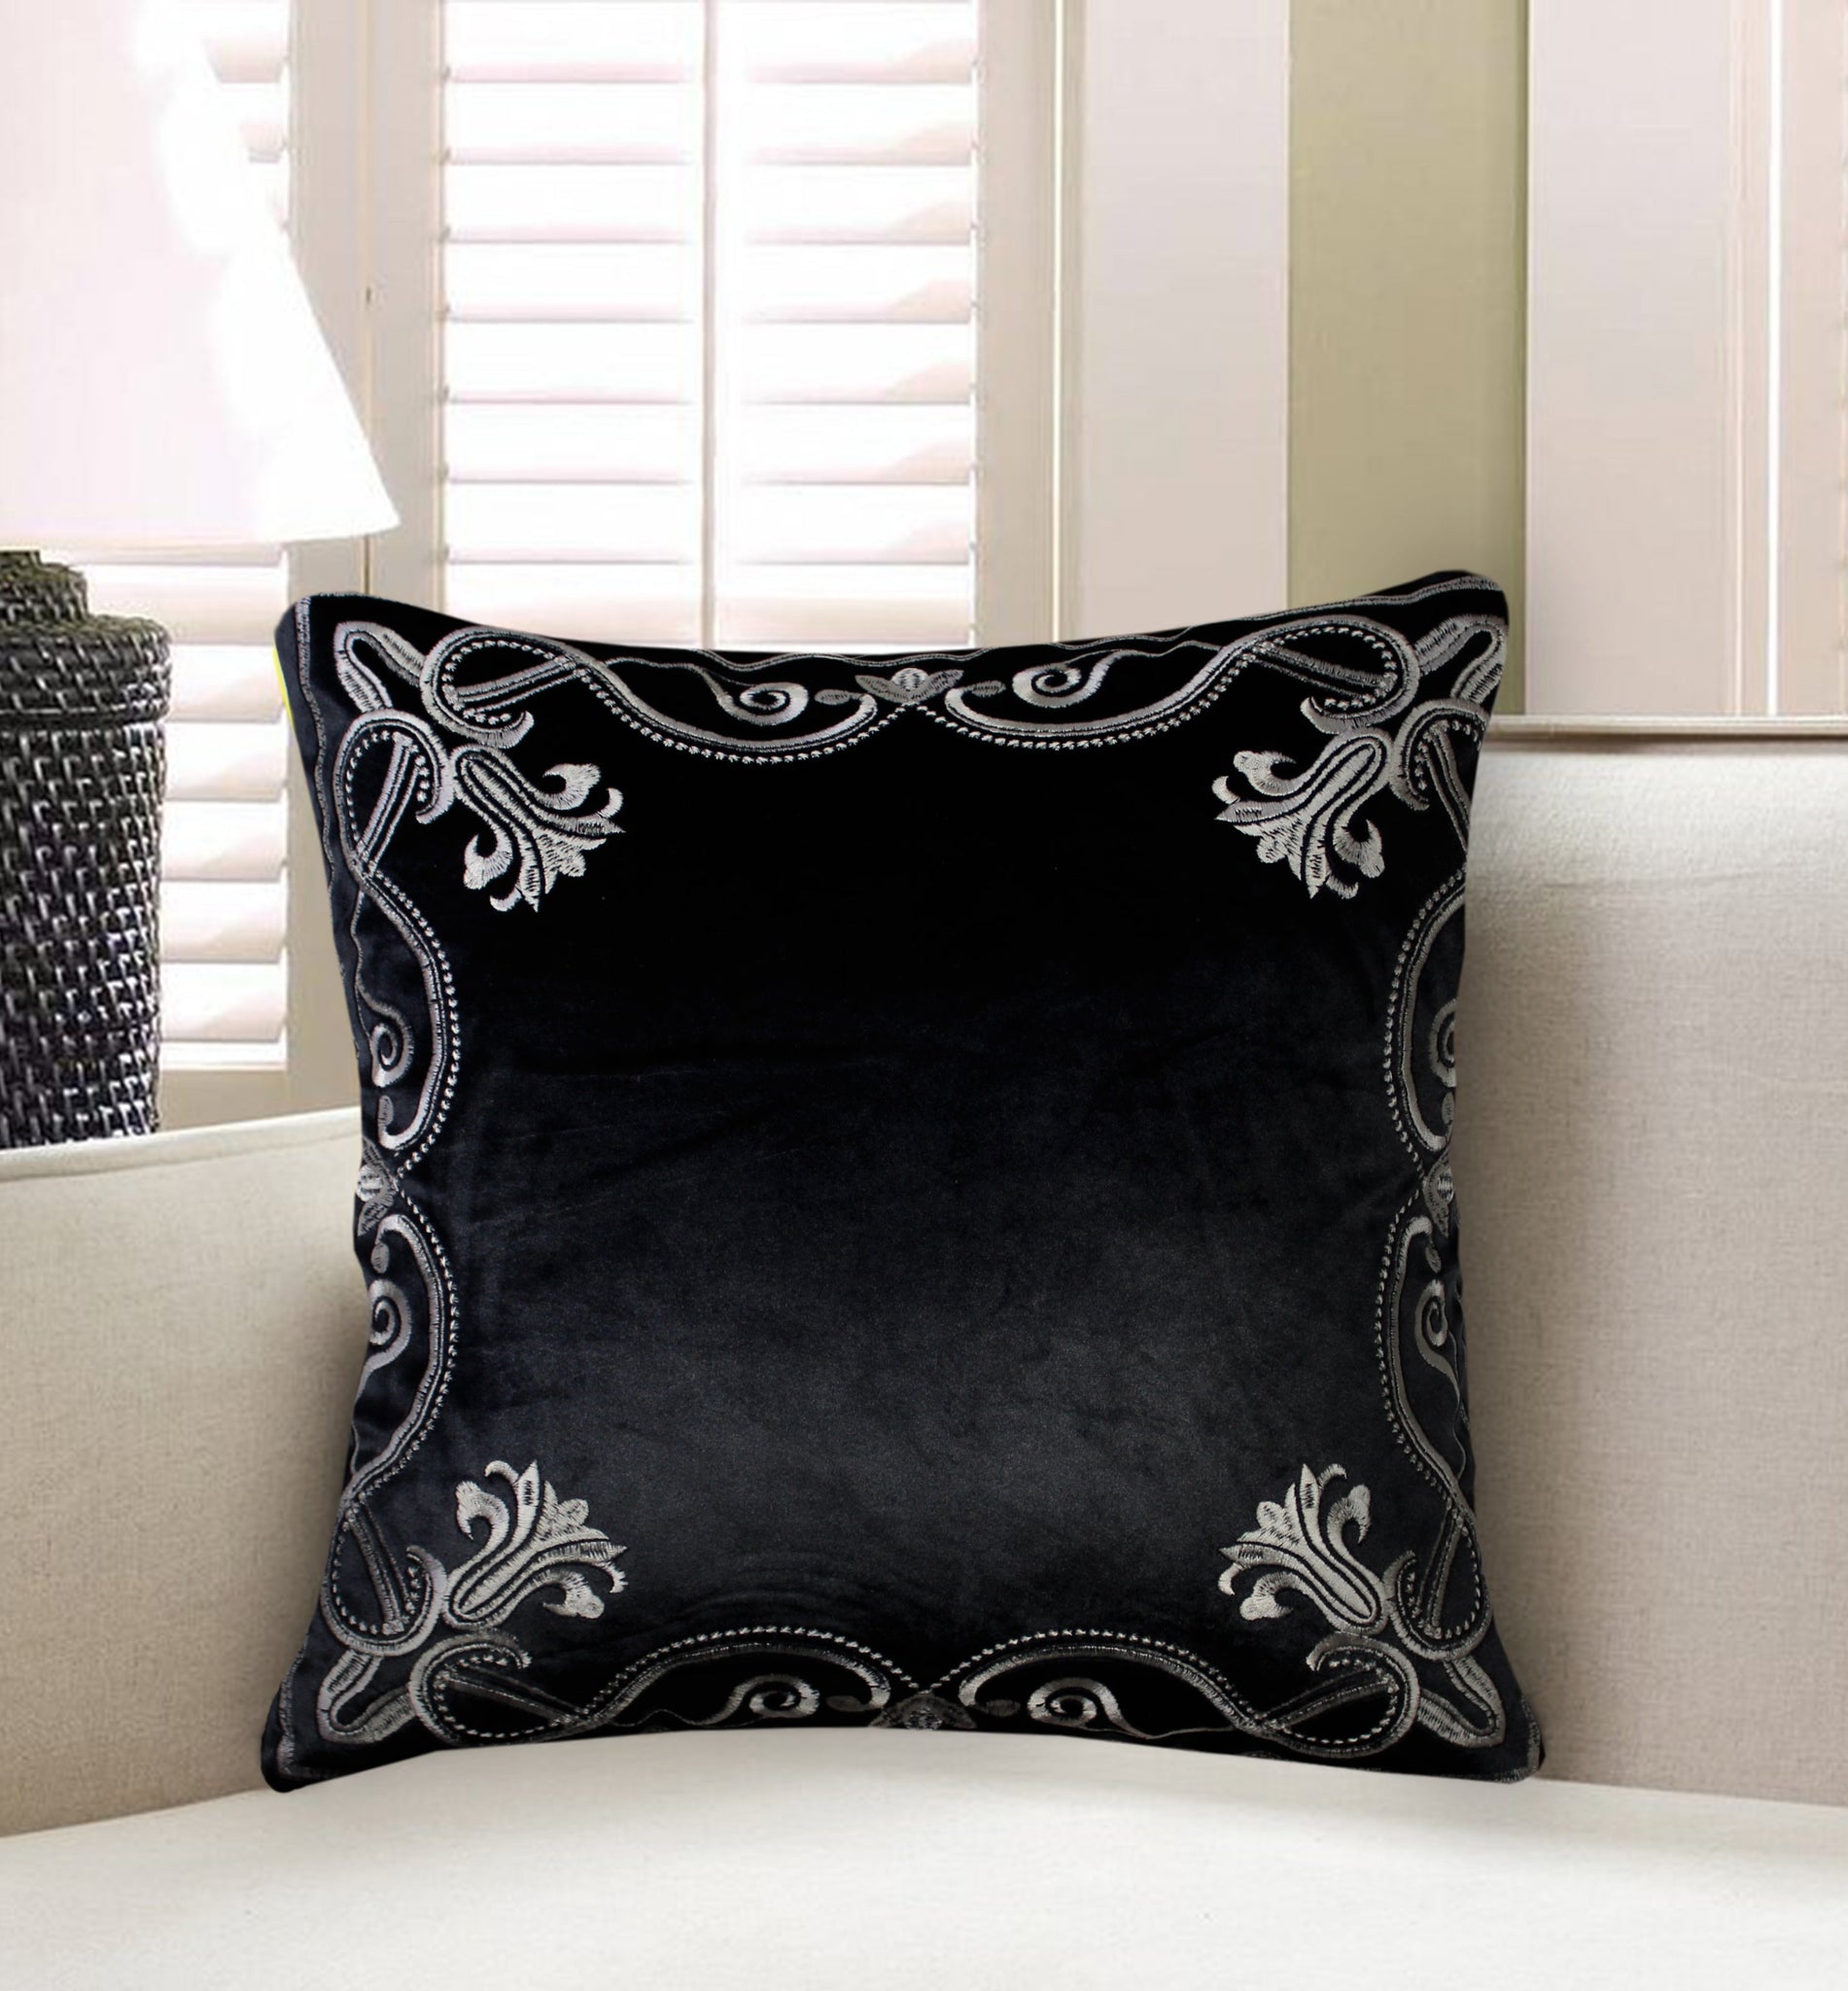 Black Luxury Embroidered Baroque Cushion Covers Velvet Pillow Case Home Decorative Sofa Throw Pillows